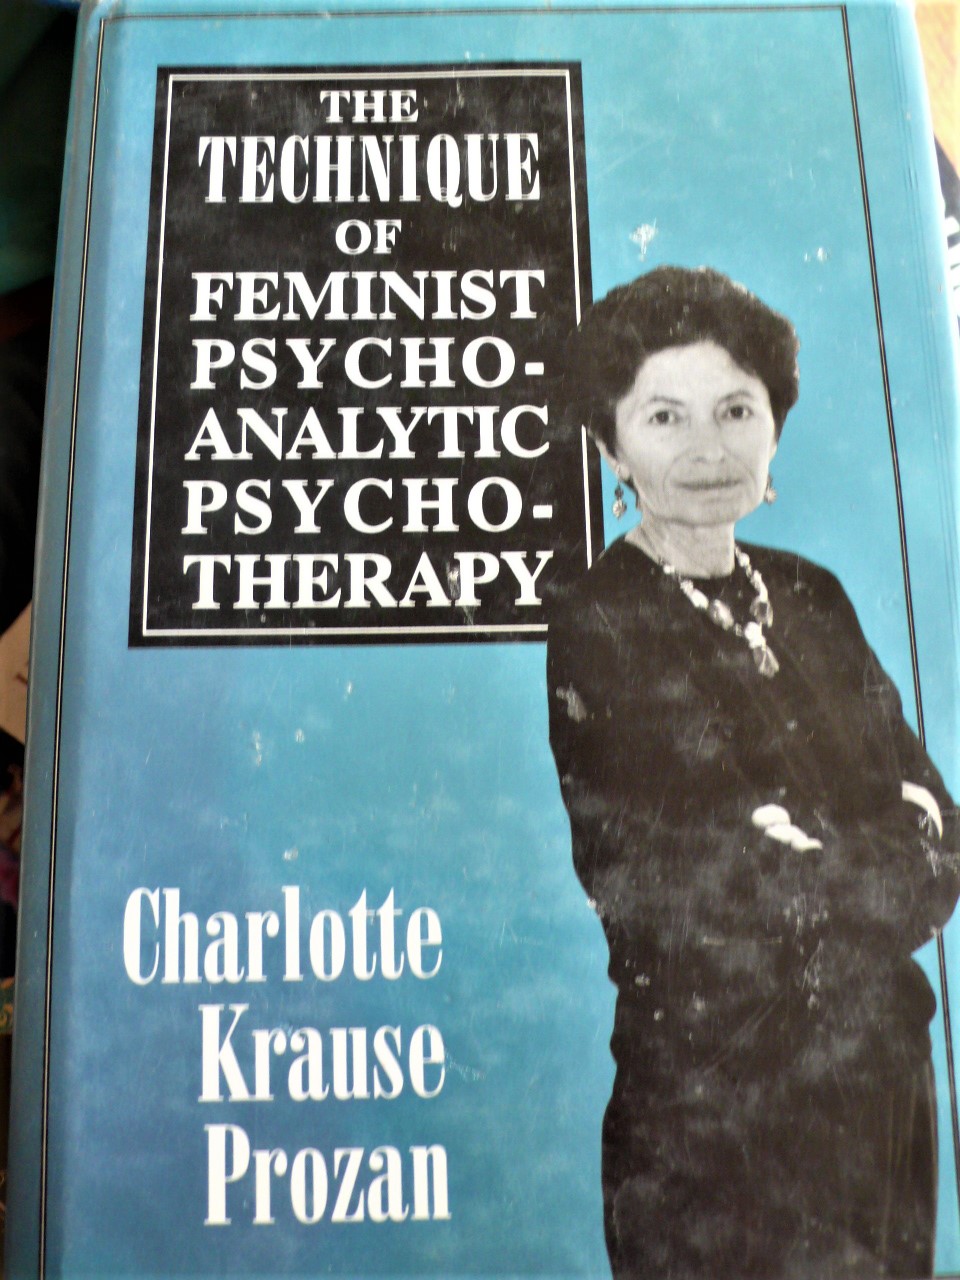 the technique of feminist psychoanalytic psychotherapy